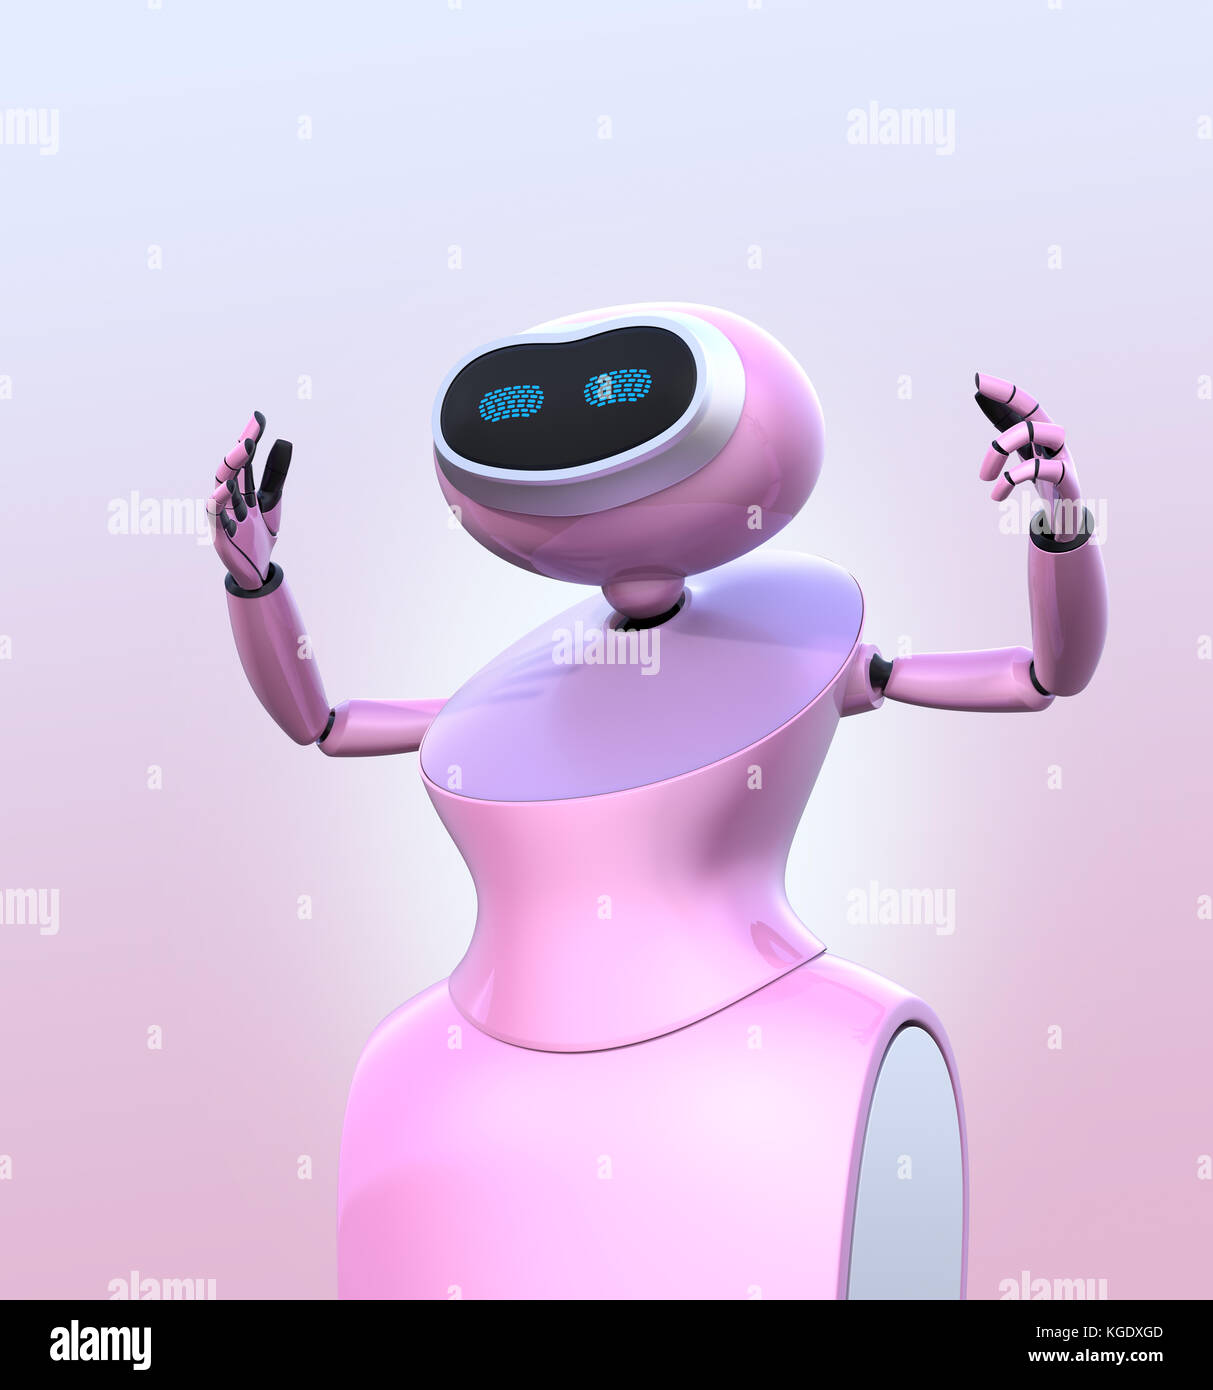 Pink humanoid robot isolated on pink background. 3D rendering image. Stock Photo